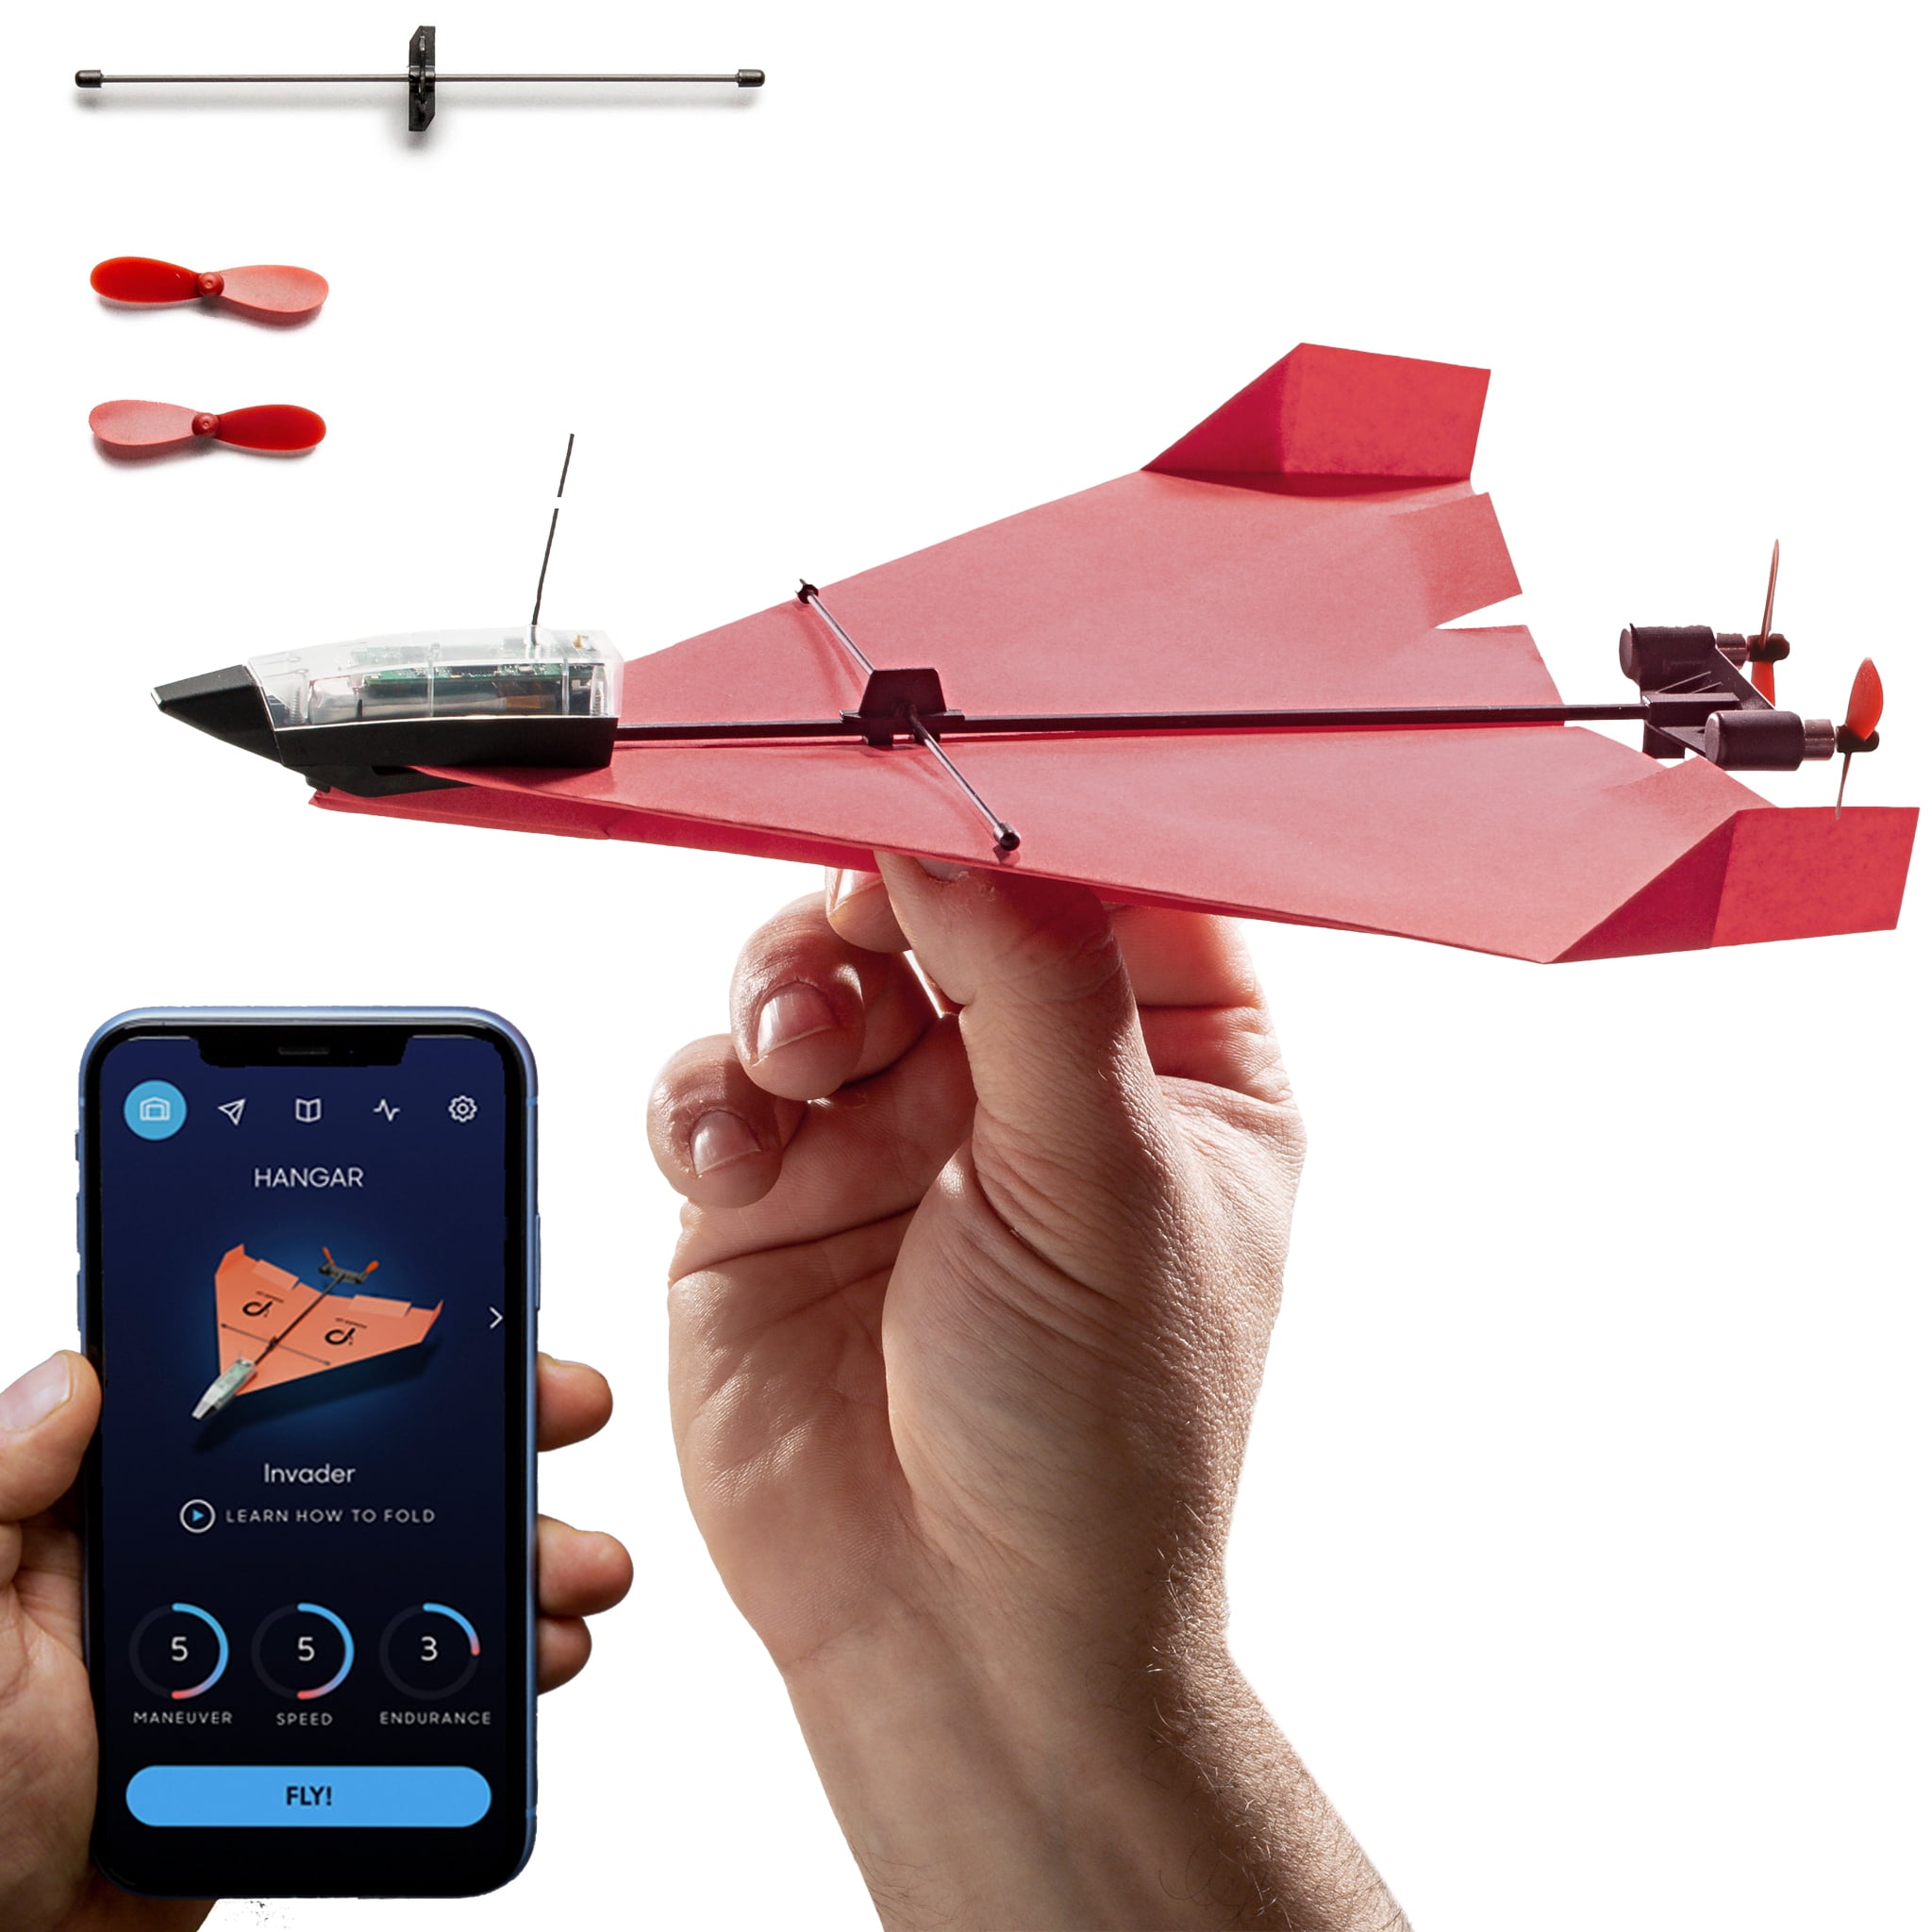 POWERUP 4.0 Smartphone Controlled Paper Airplane Kit, RC